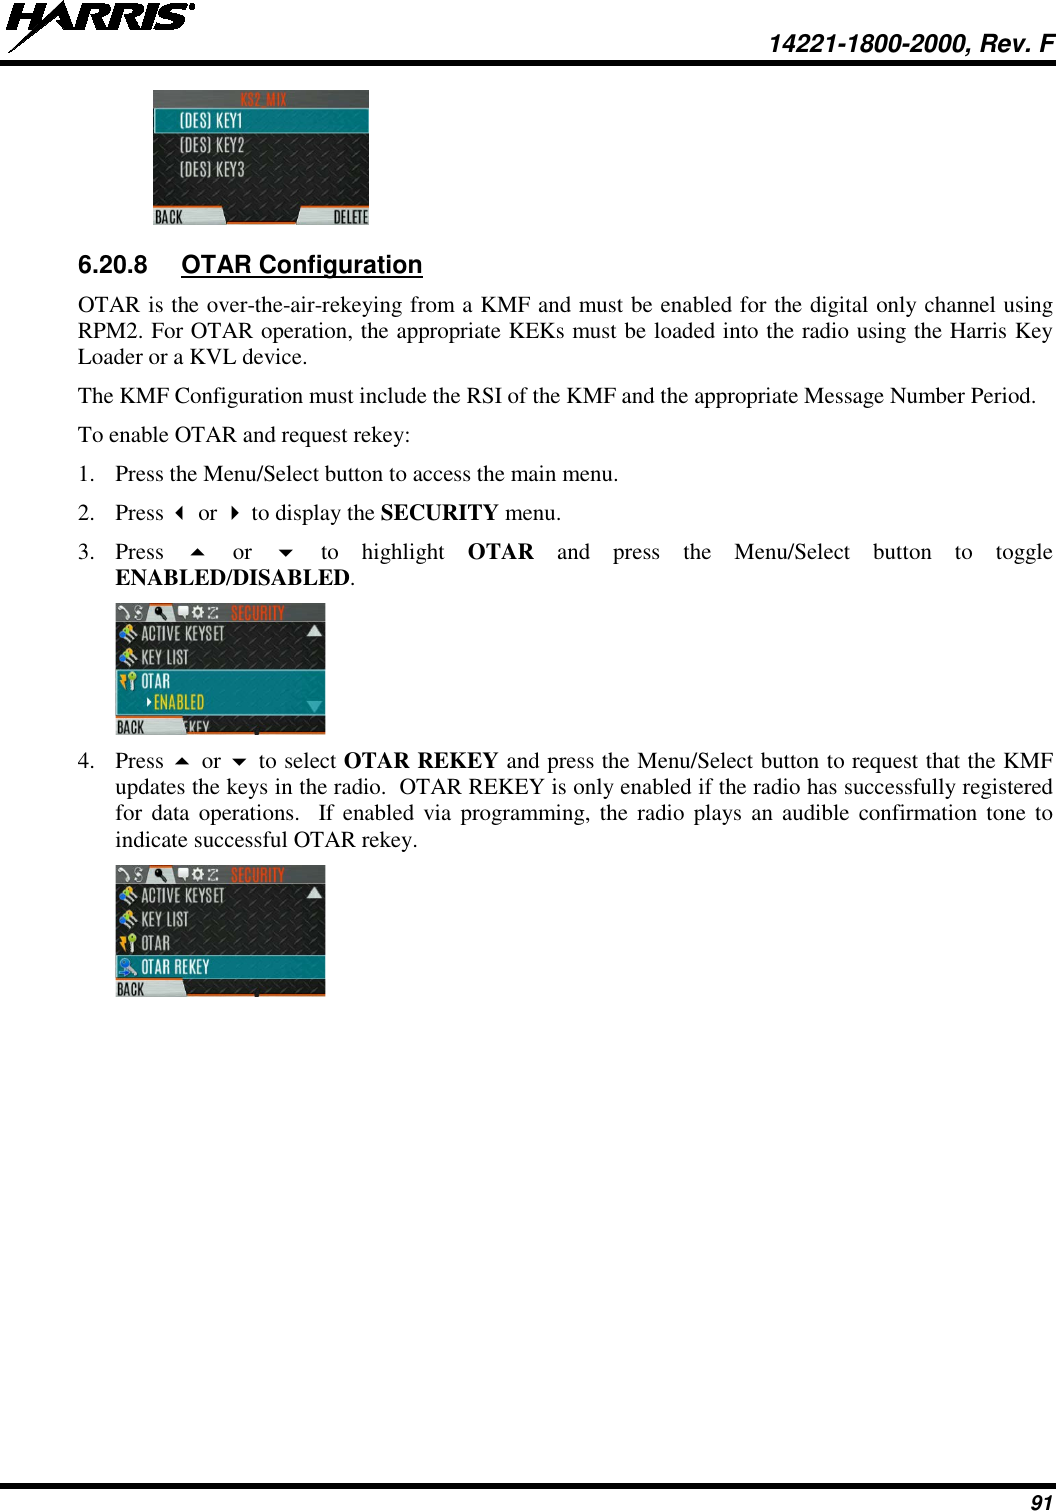  14221-1800-2000, Rev. F 91  6.20.8 OTAR Configuration OTAR is the over-the-air-rekeying from a KMF and must be enabled for the digital only channel using RPM2. For OTAR operation, the appropriate KEKs must be loaded into the radio using the Harris Key Loader or a KVL device. The KMF Configuration must include the RSI of the KMF and the appropriate Message Number Period. To enable OTAR and request rekey: 1. Press the Menu/Select button to access the main menu. 2. Press  or  to display the SECURITY menu. 3. Press    or   to highlight OTAR  and  press the Menu/Select button to toggle ENABLED/DISABLED.  4. Press  or  to select OTAR REKEY and press the Menu/Select button to request that the KMF updates the keys in the radio.  OTAR REKEY is only enabled if the radio has successfully registered for data operations.  If enabled via programming, the radio plays an audible confirmation tone to indicate successful OTAR rekey.  